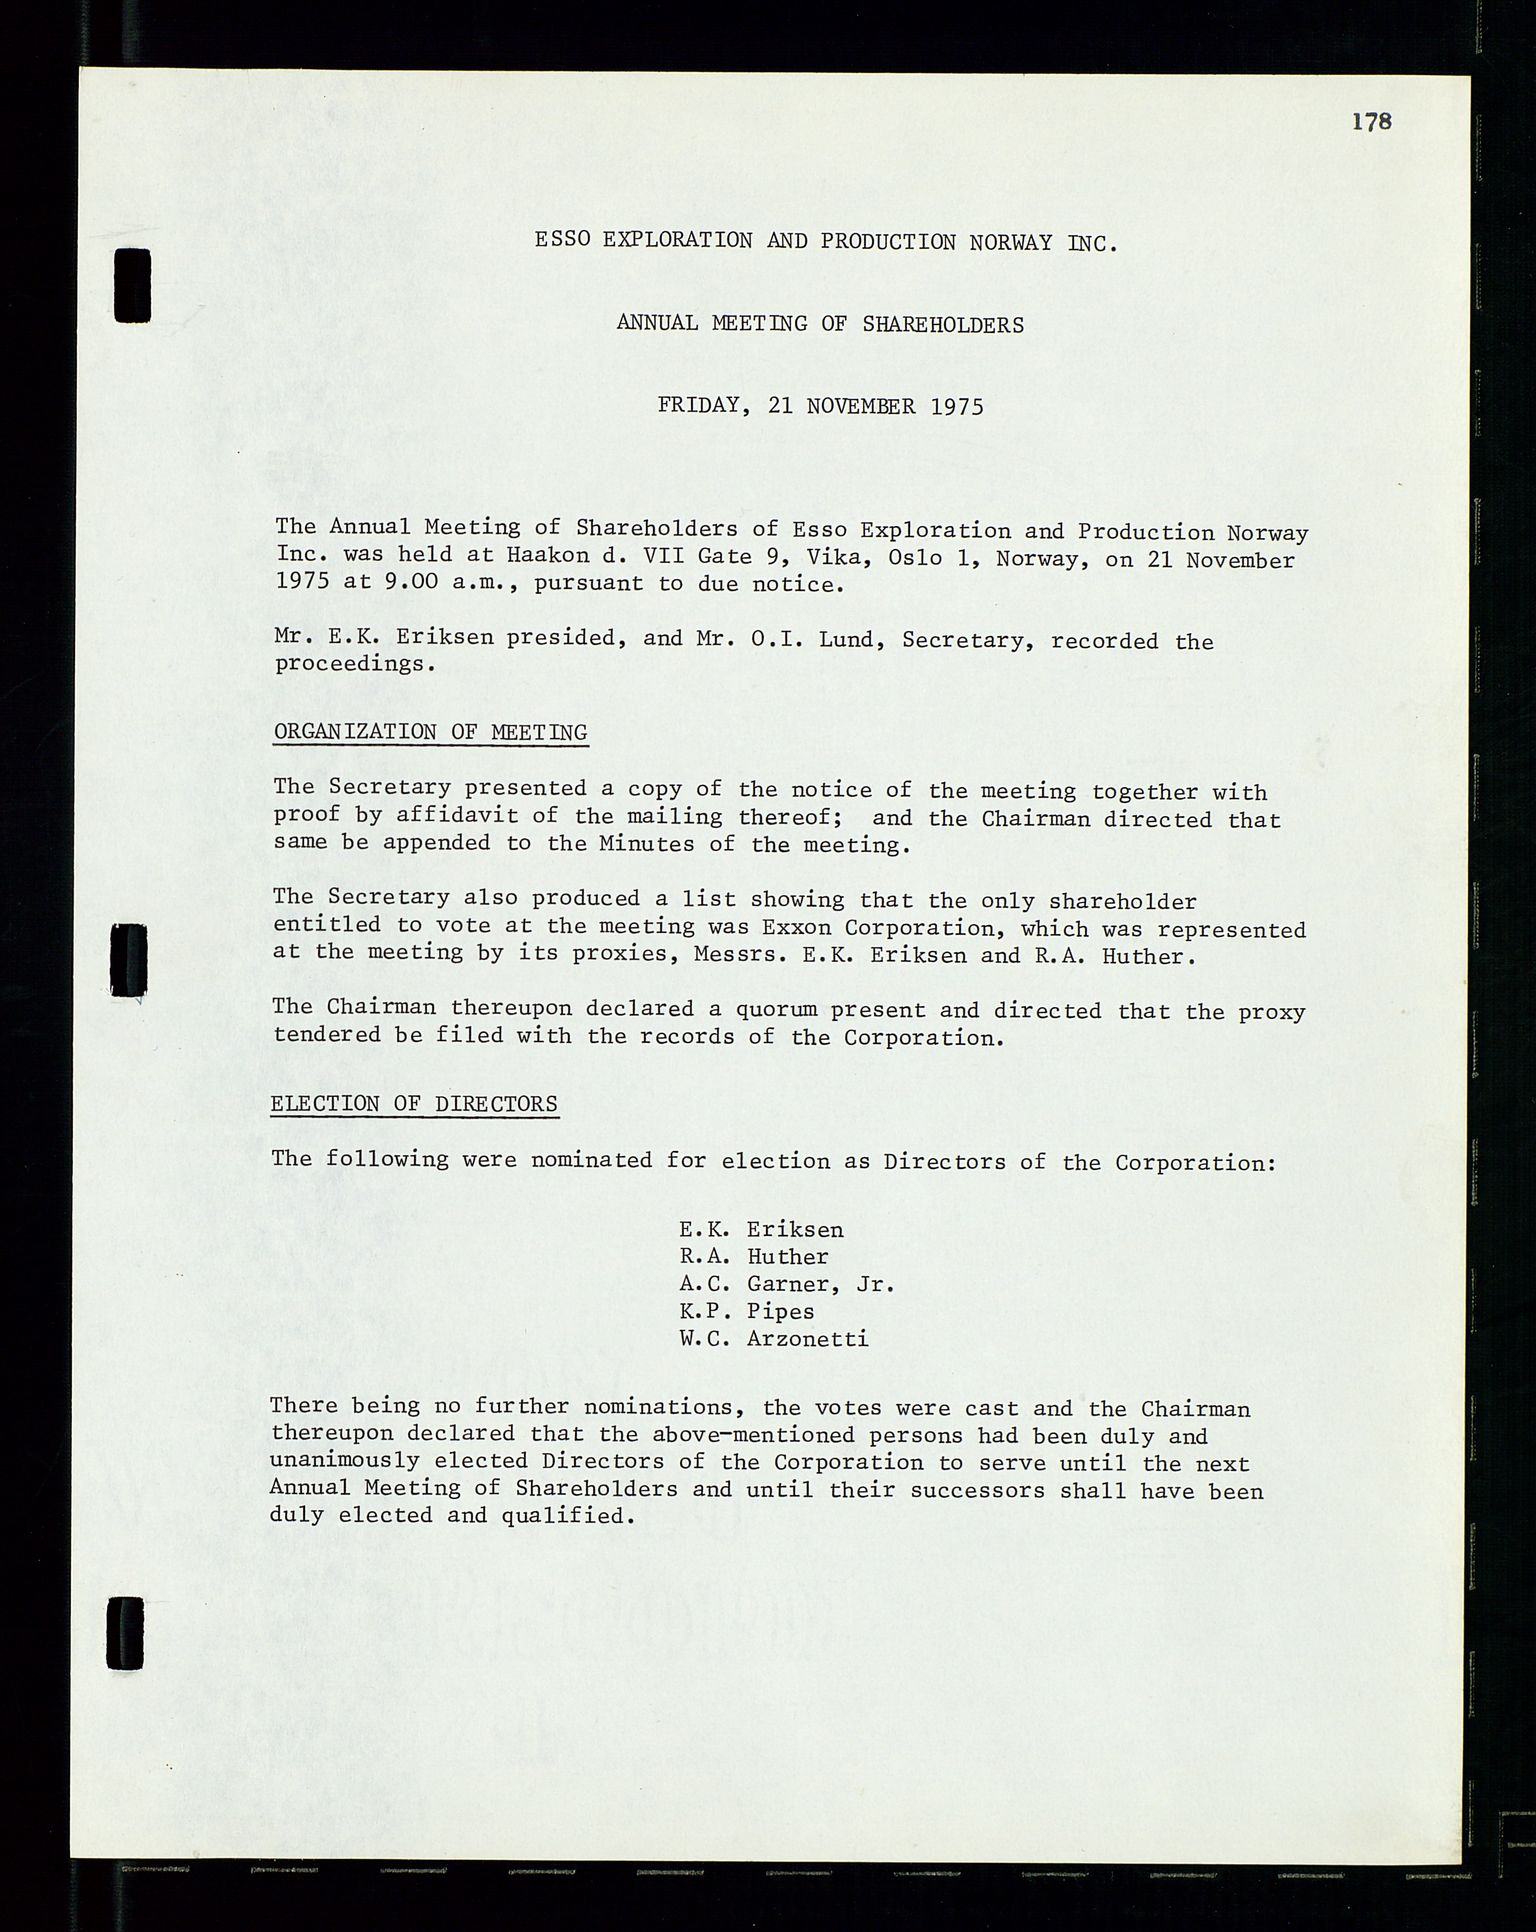 Pa 1512 - Esso Exploration and Production Norway Inc., SAST/A-101917/A/Aa/L0001/0002: Styredokumenter / Corporate records, Board meeting minutes, Agreements, Stocholder meetings, 1975-1979, p. 9